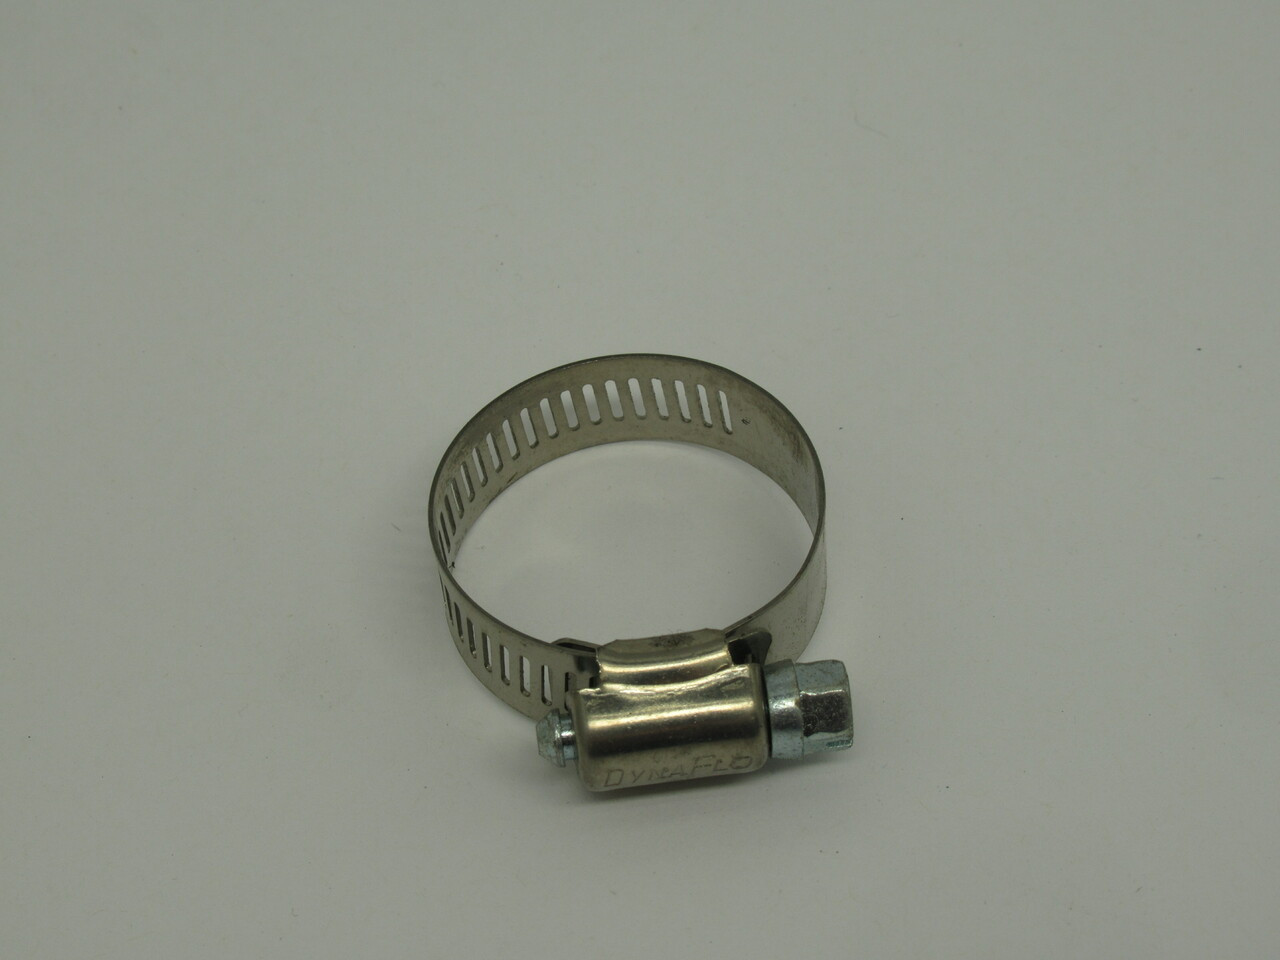 DynaFlo 18 1-1/2" Stainless Steel Worm Drive Clamp 17-38mm NOP